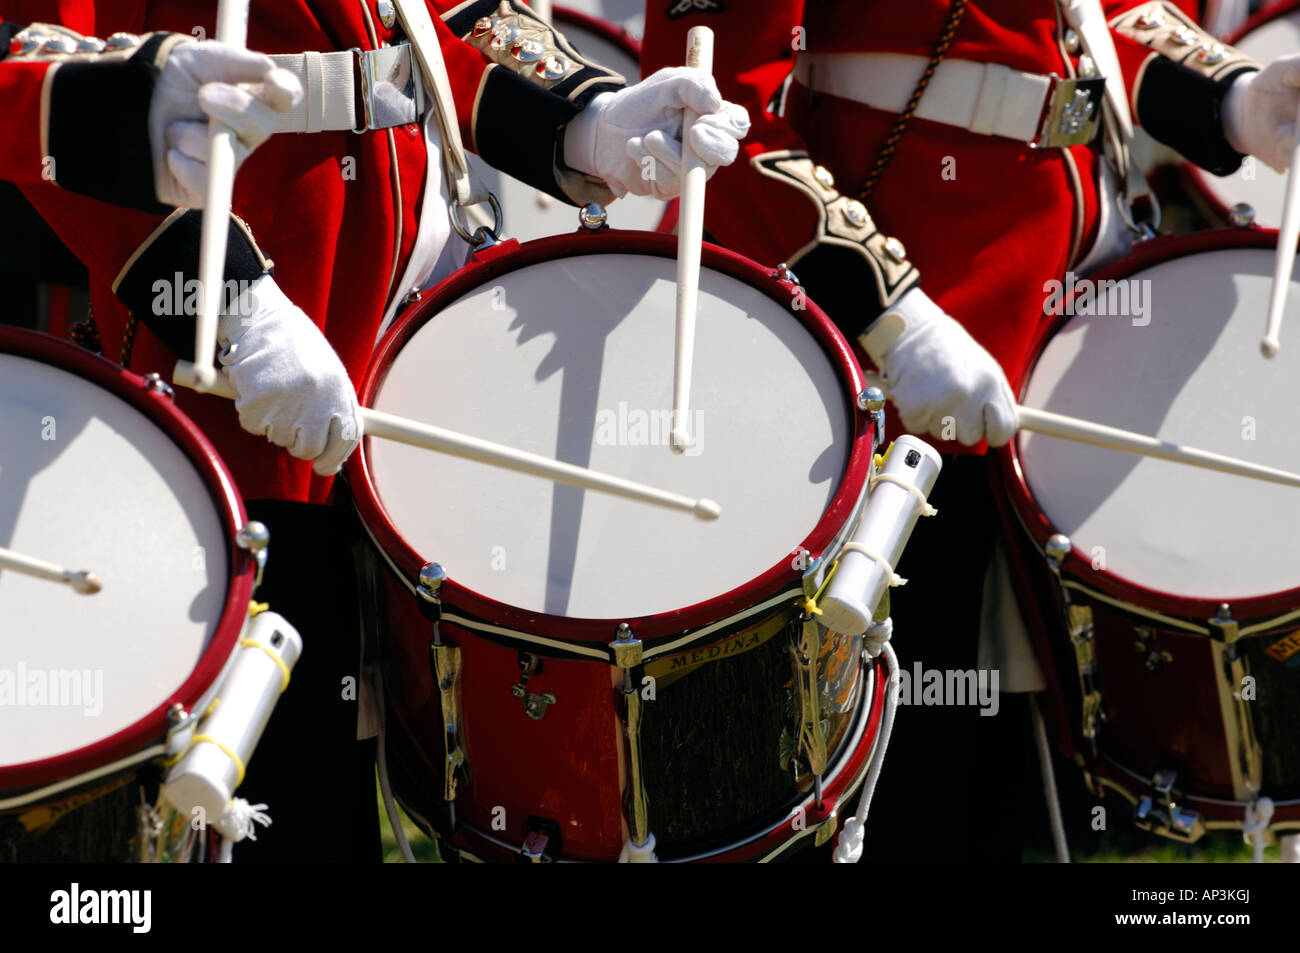 military band drummers beating drums on parade marching smartly